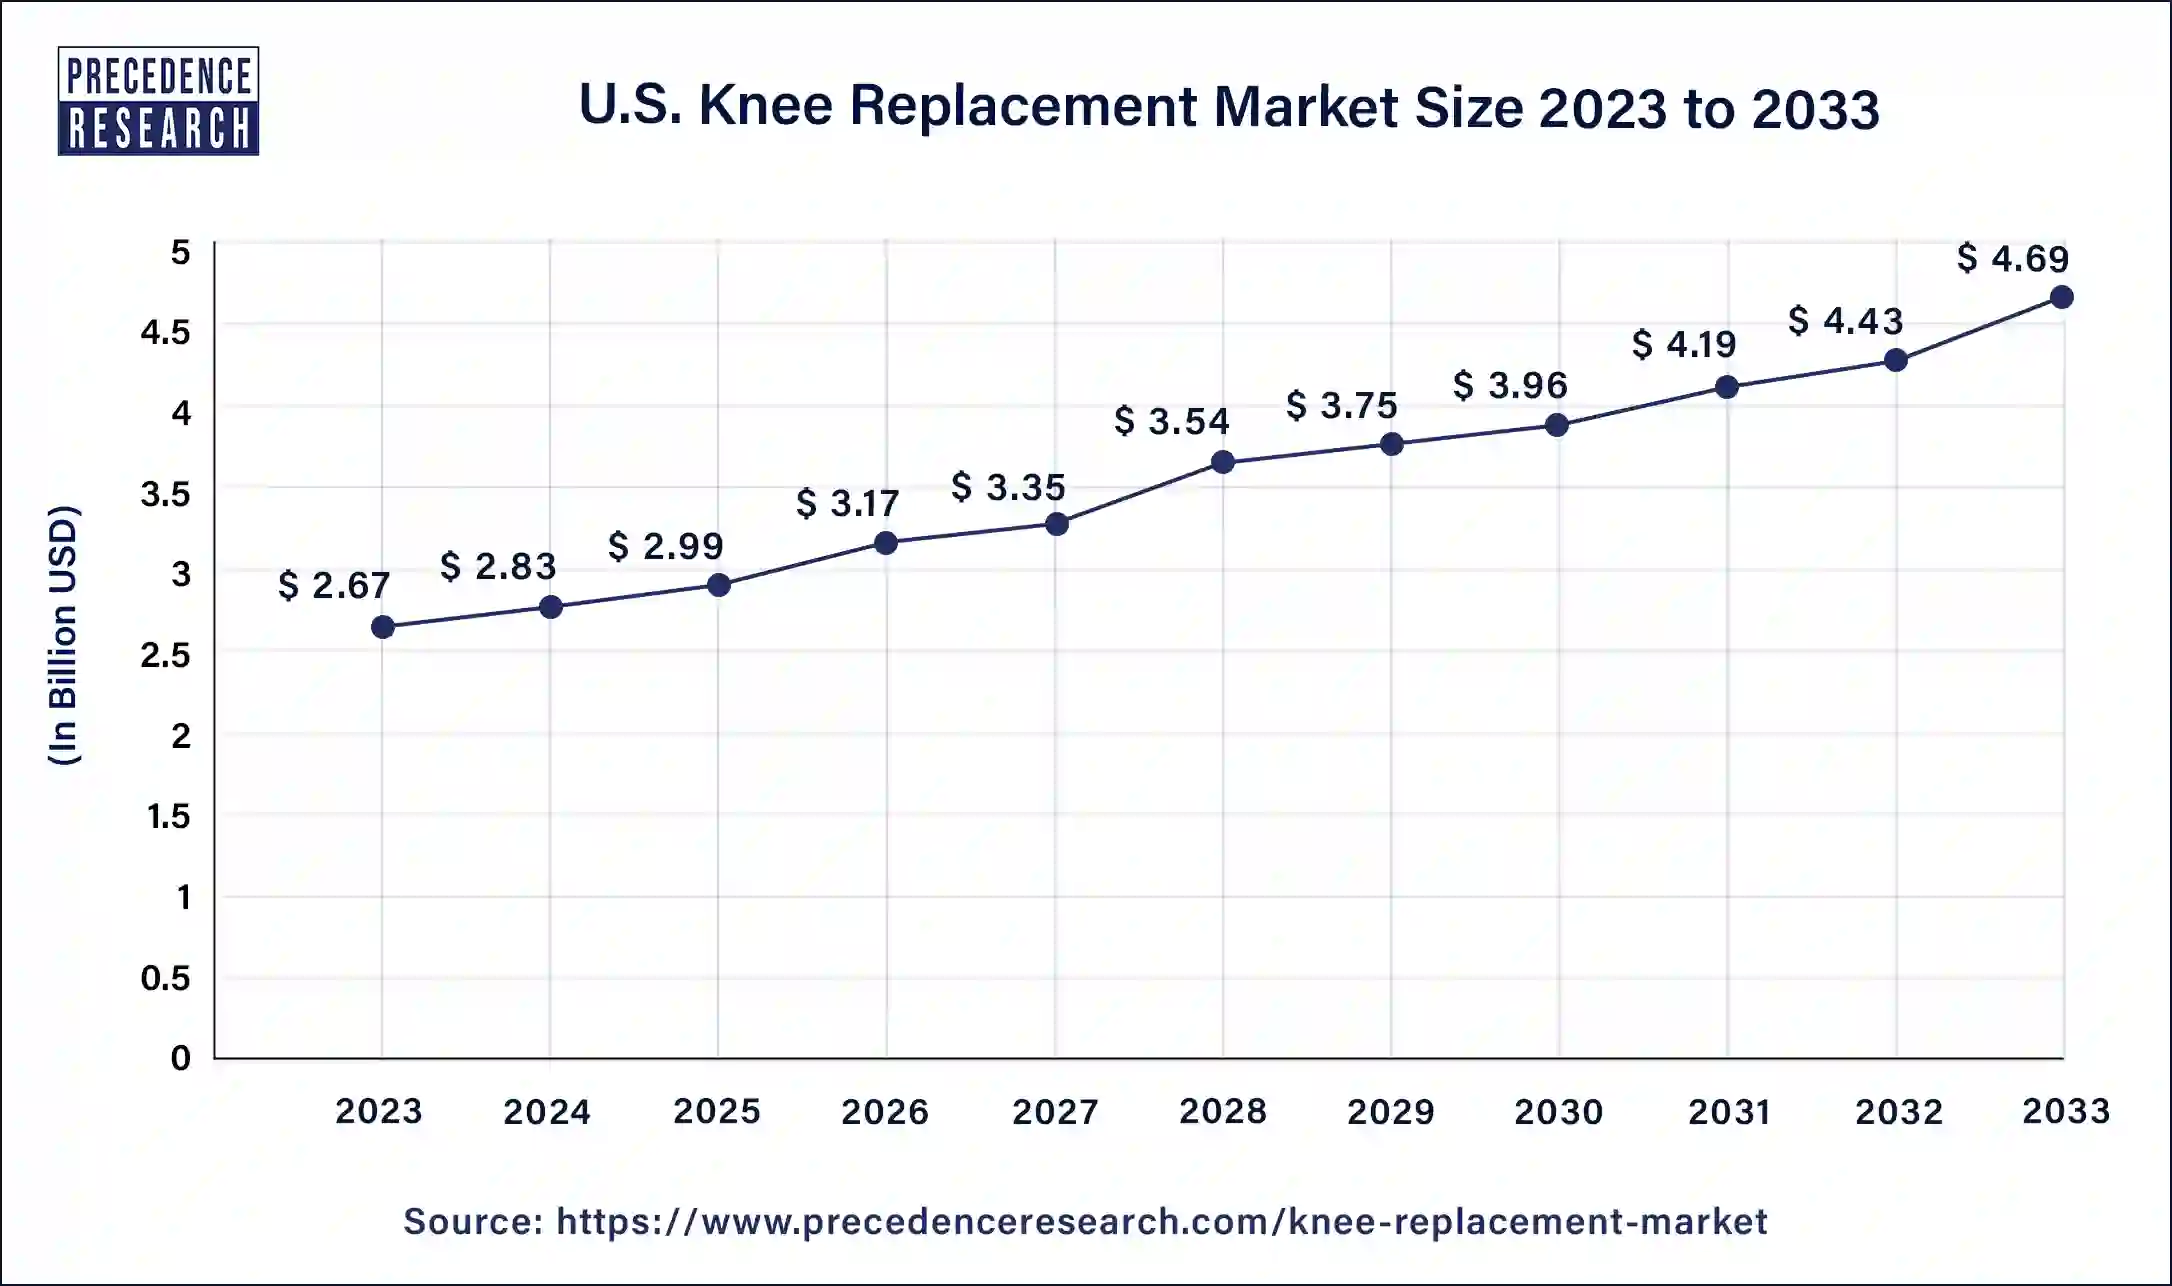 U.S. Knee Replacement Market Size 2024 to 2033